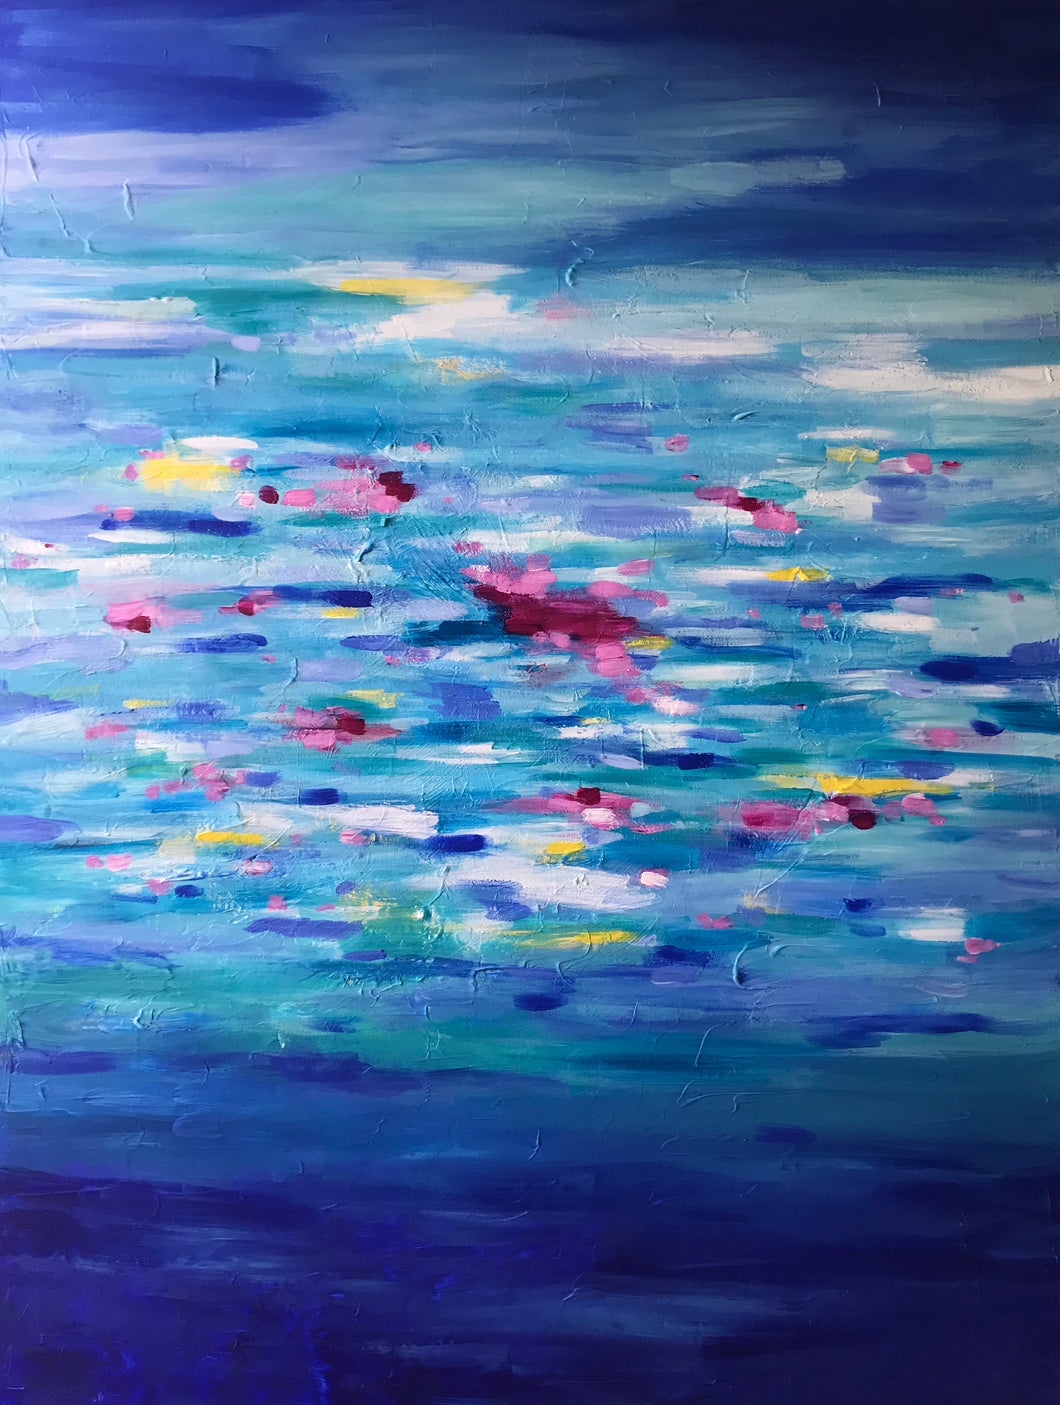 Out of the Blue - 30”x40”